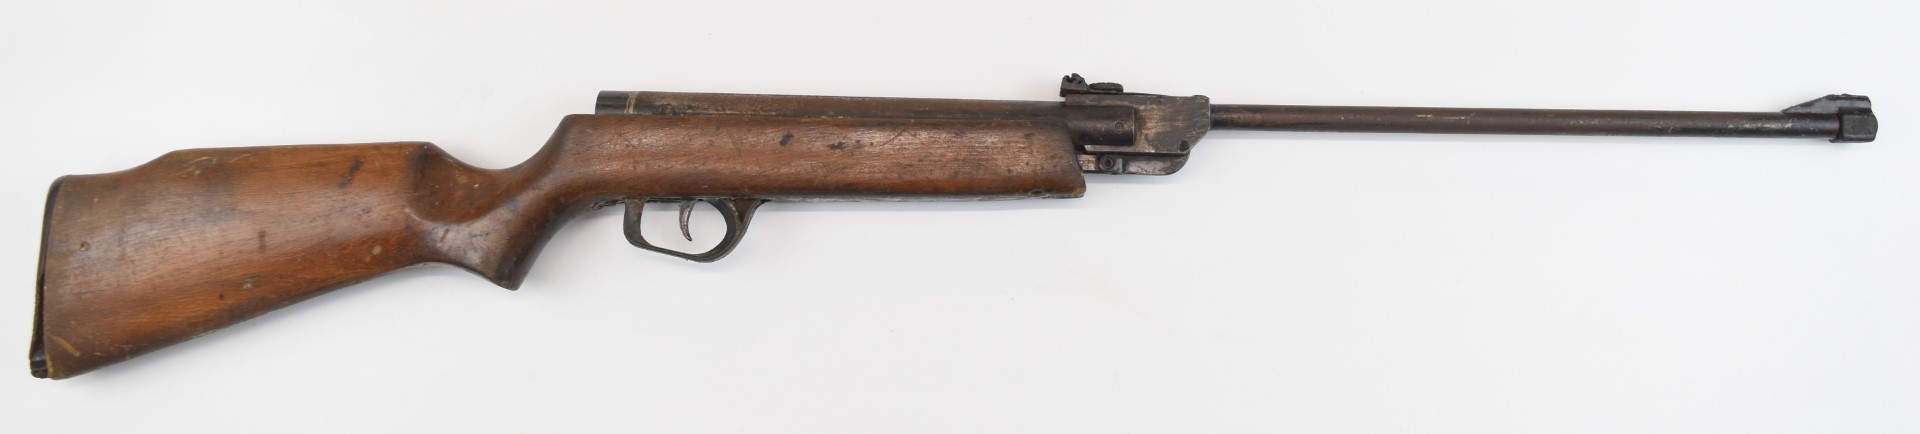 Gamo .22 air rifle with semi-pistol grip and adjustable sights, serial number T68059. - Image 2 of 16